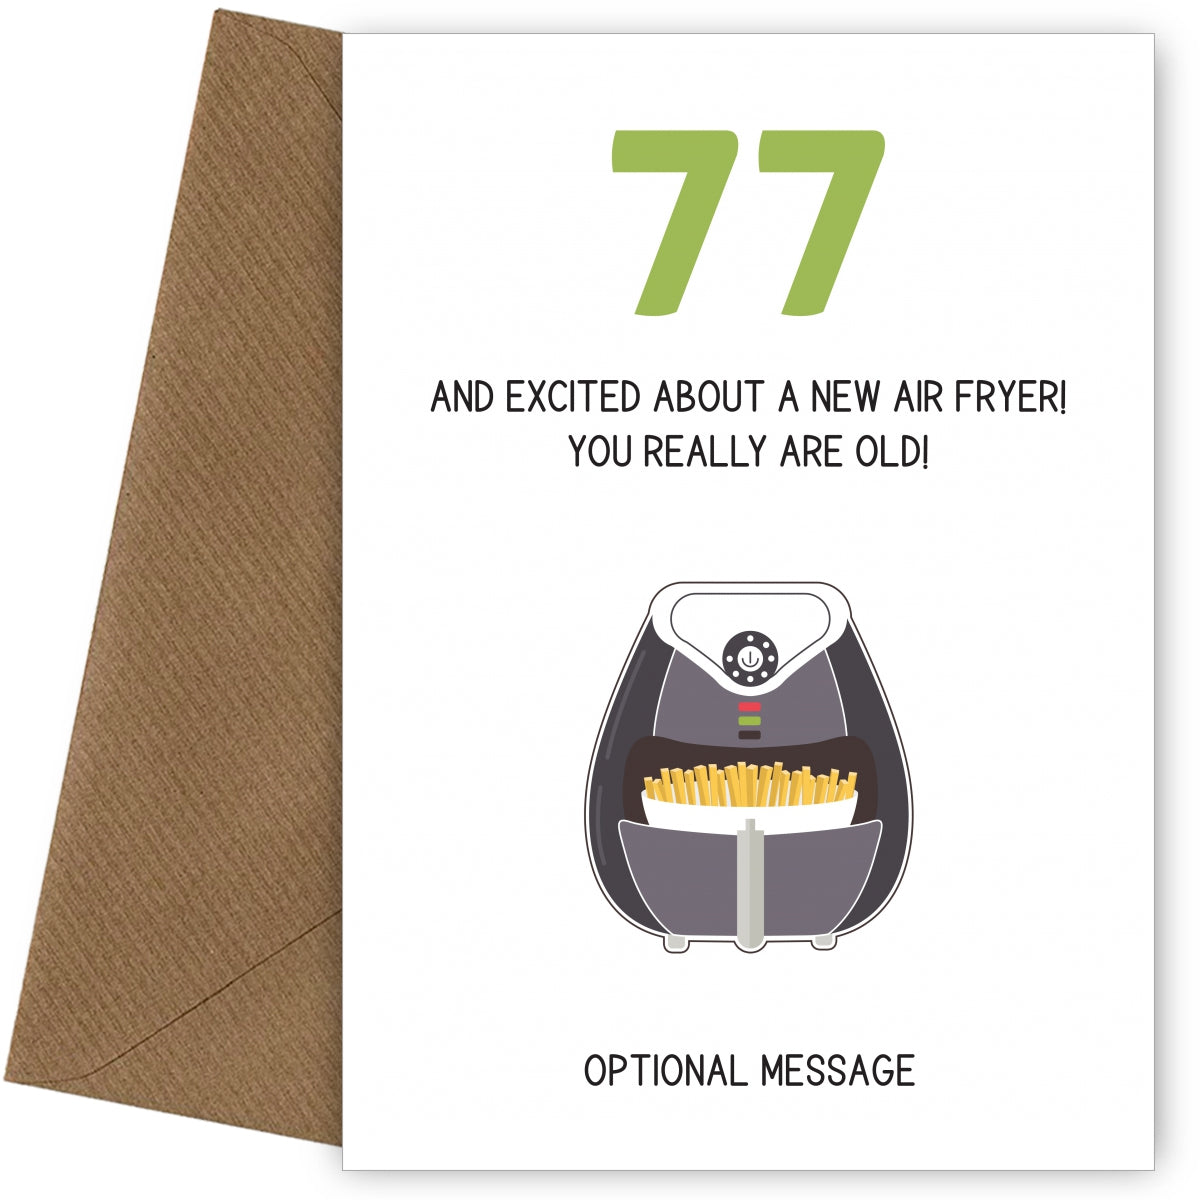 Happy 77th Birthday Card - Excited About an Air Fryer!